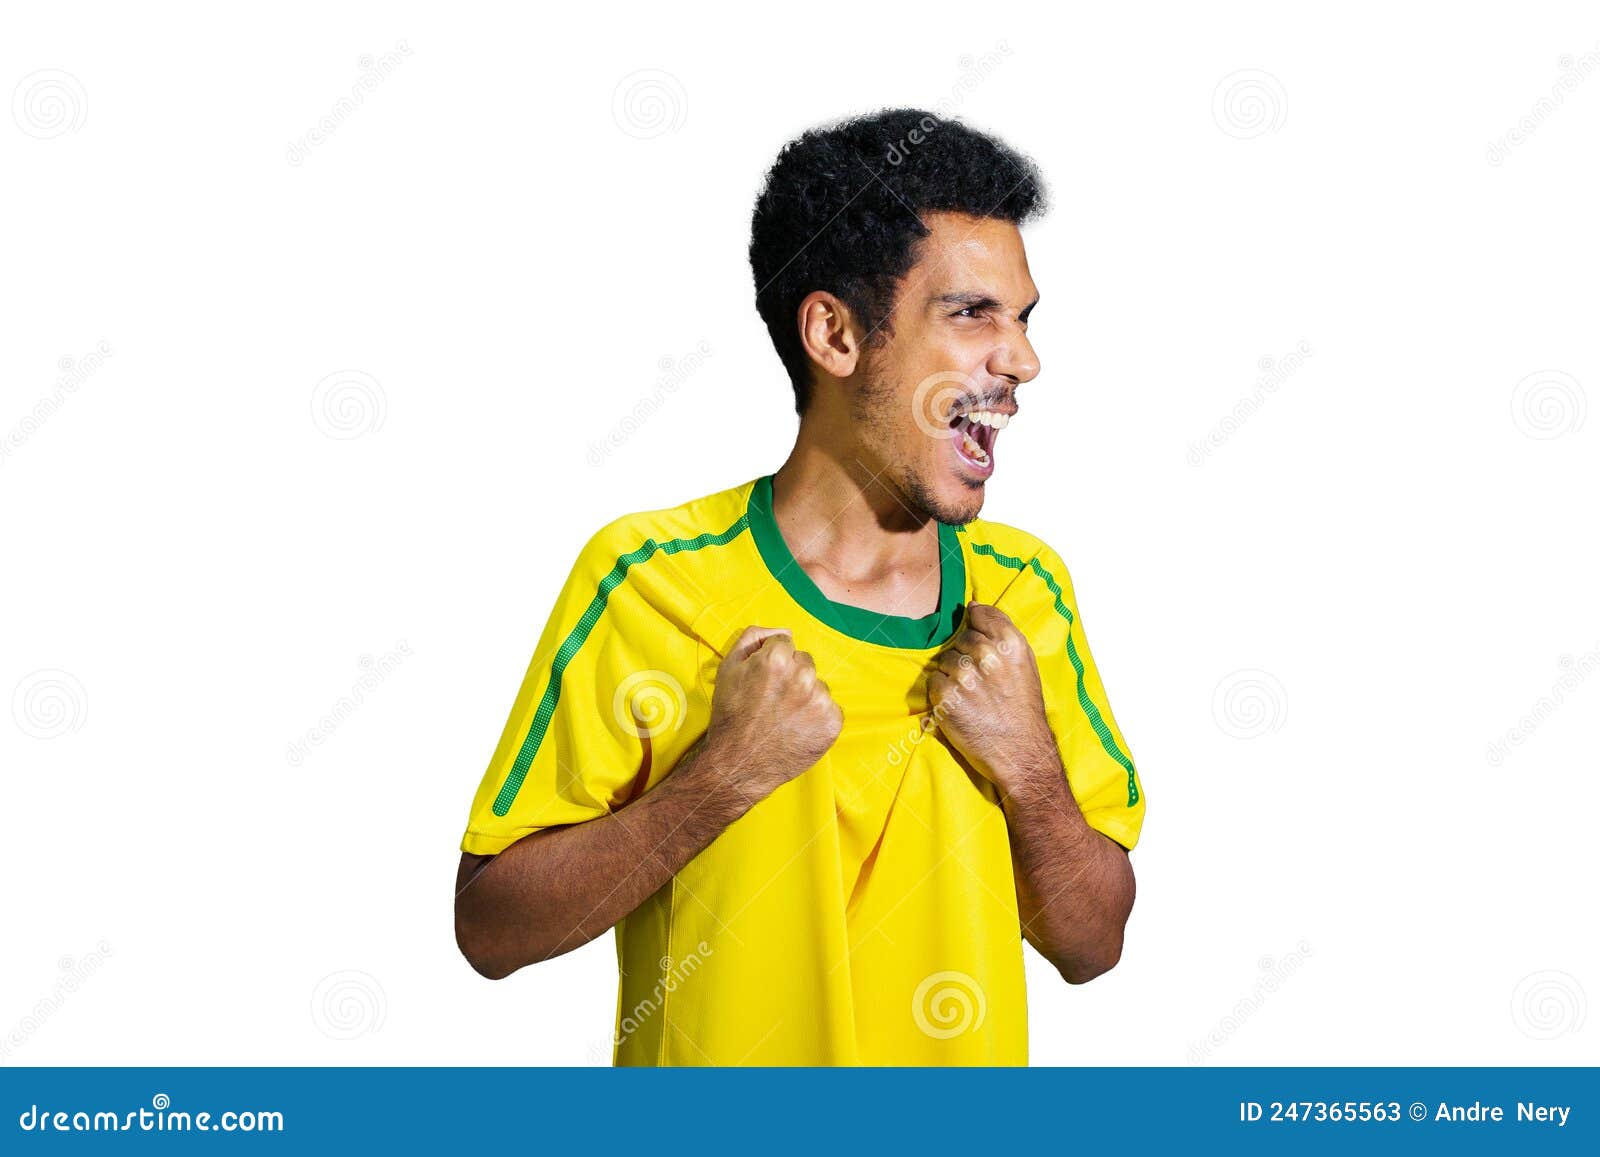 Male Athlete or Fan in Yellow Uniform Celebrating Isolated Stock Image ...